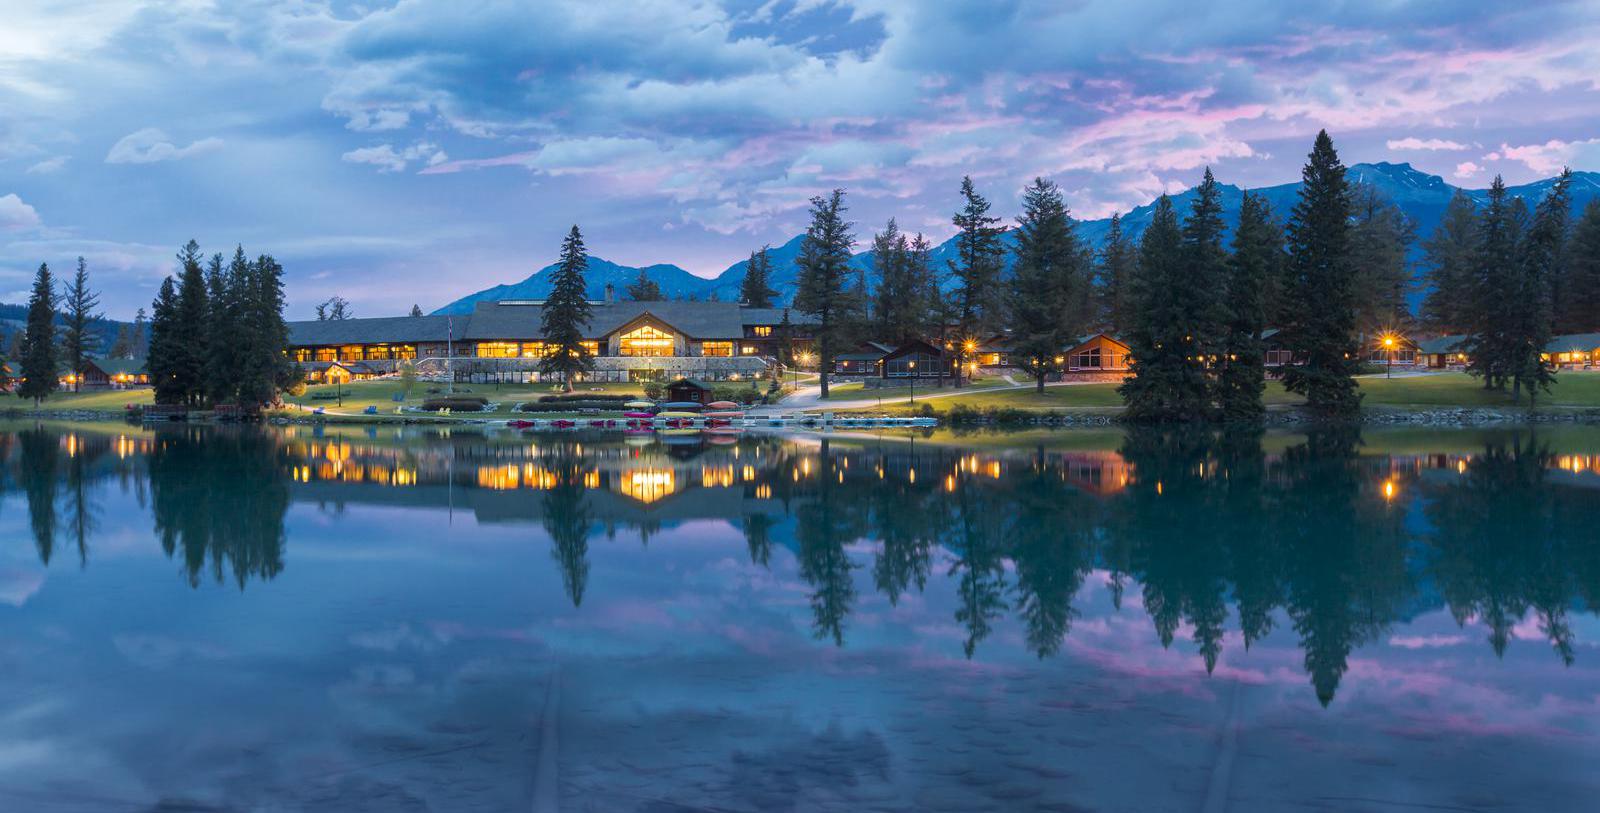 Discover the beautiful Jasper National Park that surrounds this great historic hotel.